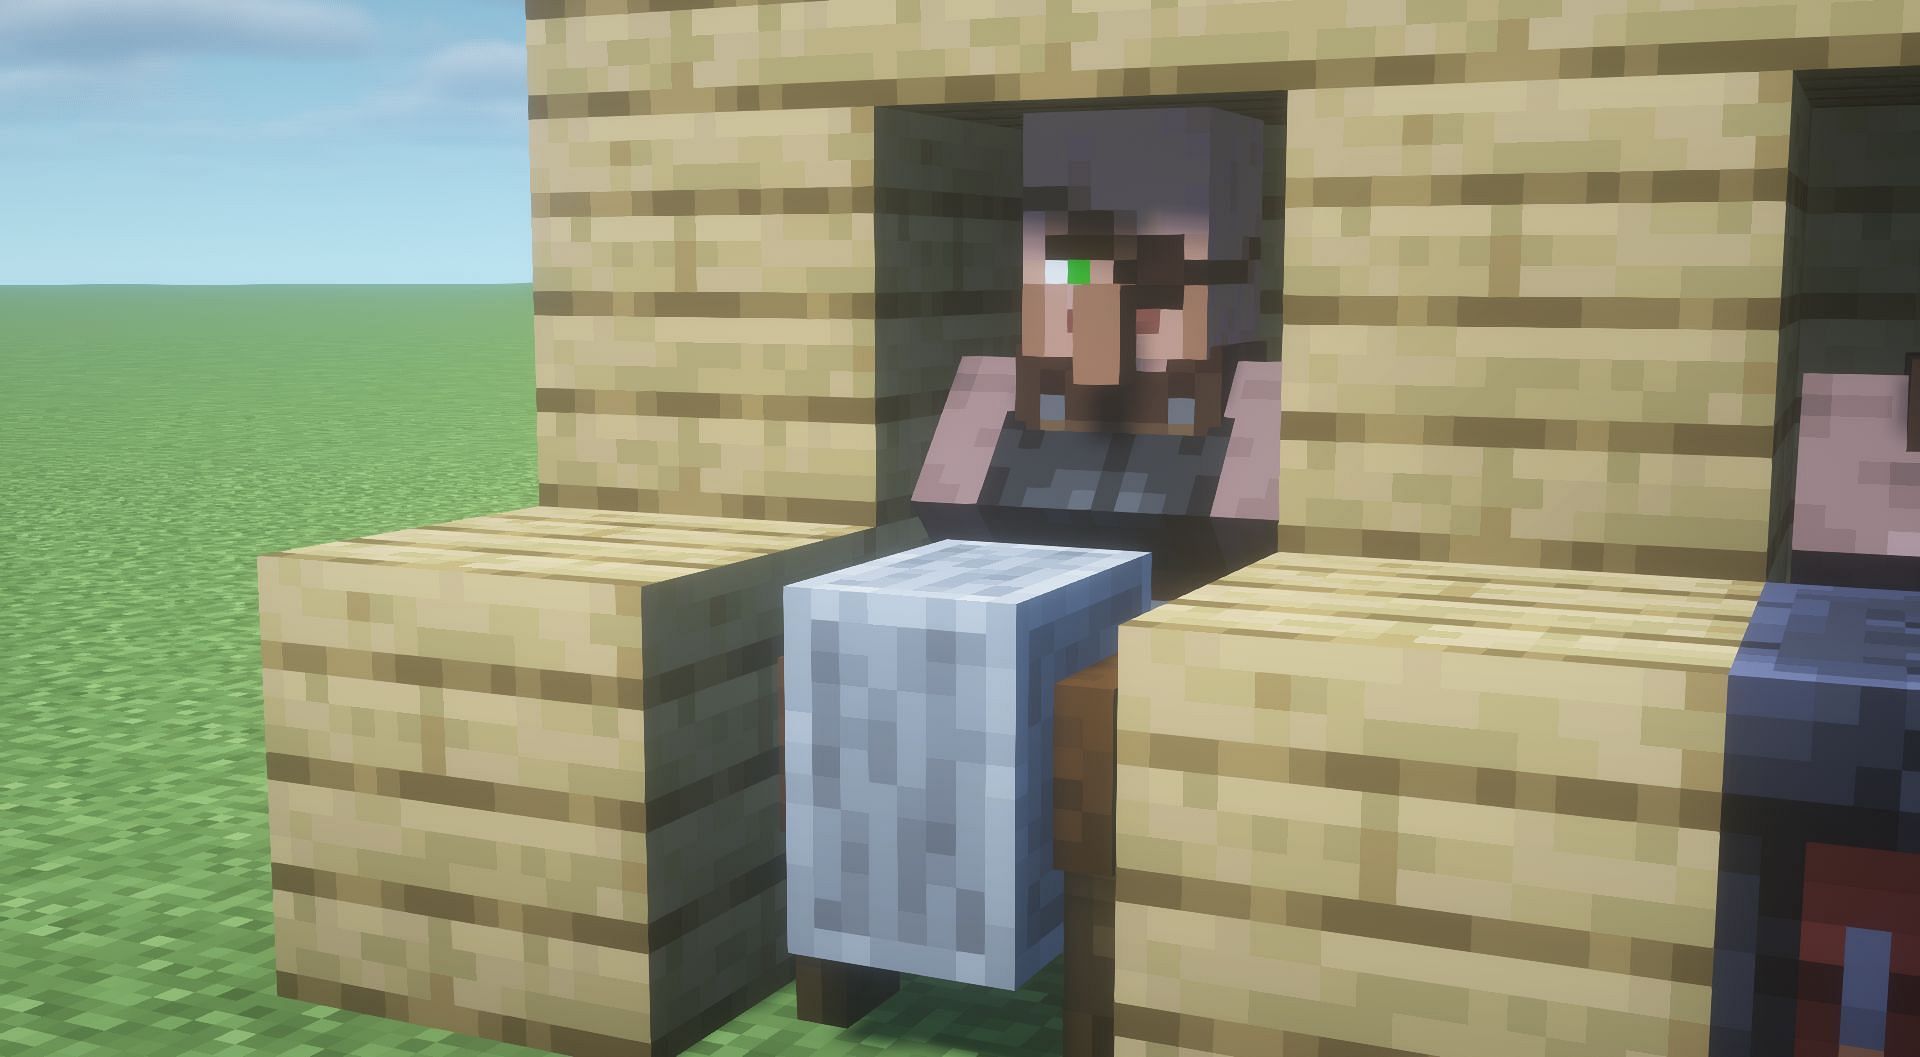 Players can trap villagers with their jobsite block (Image via Minecraft 1.19 update)